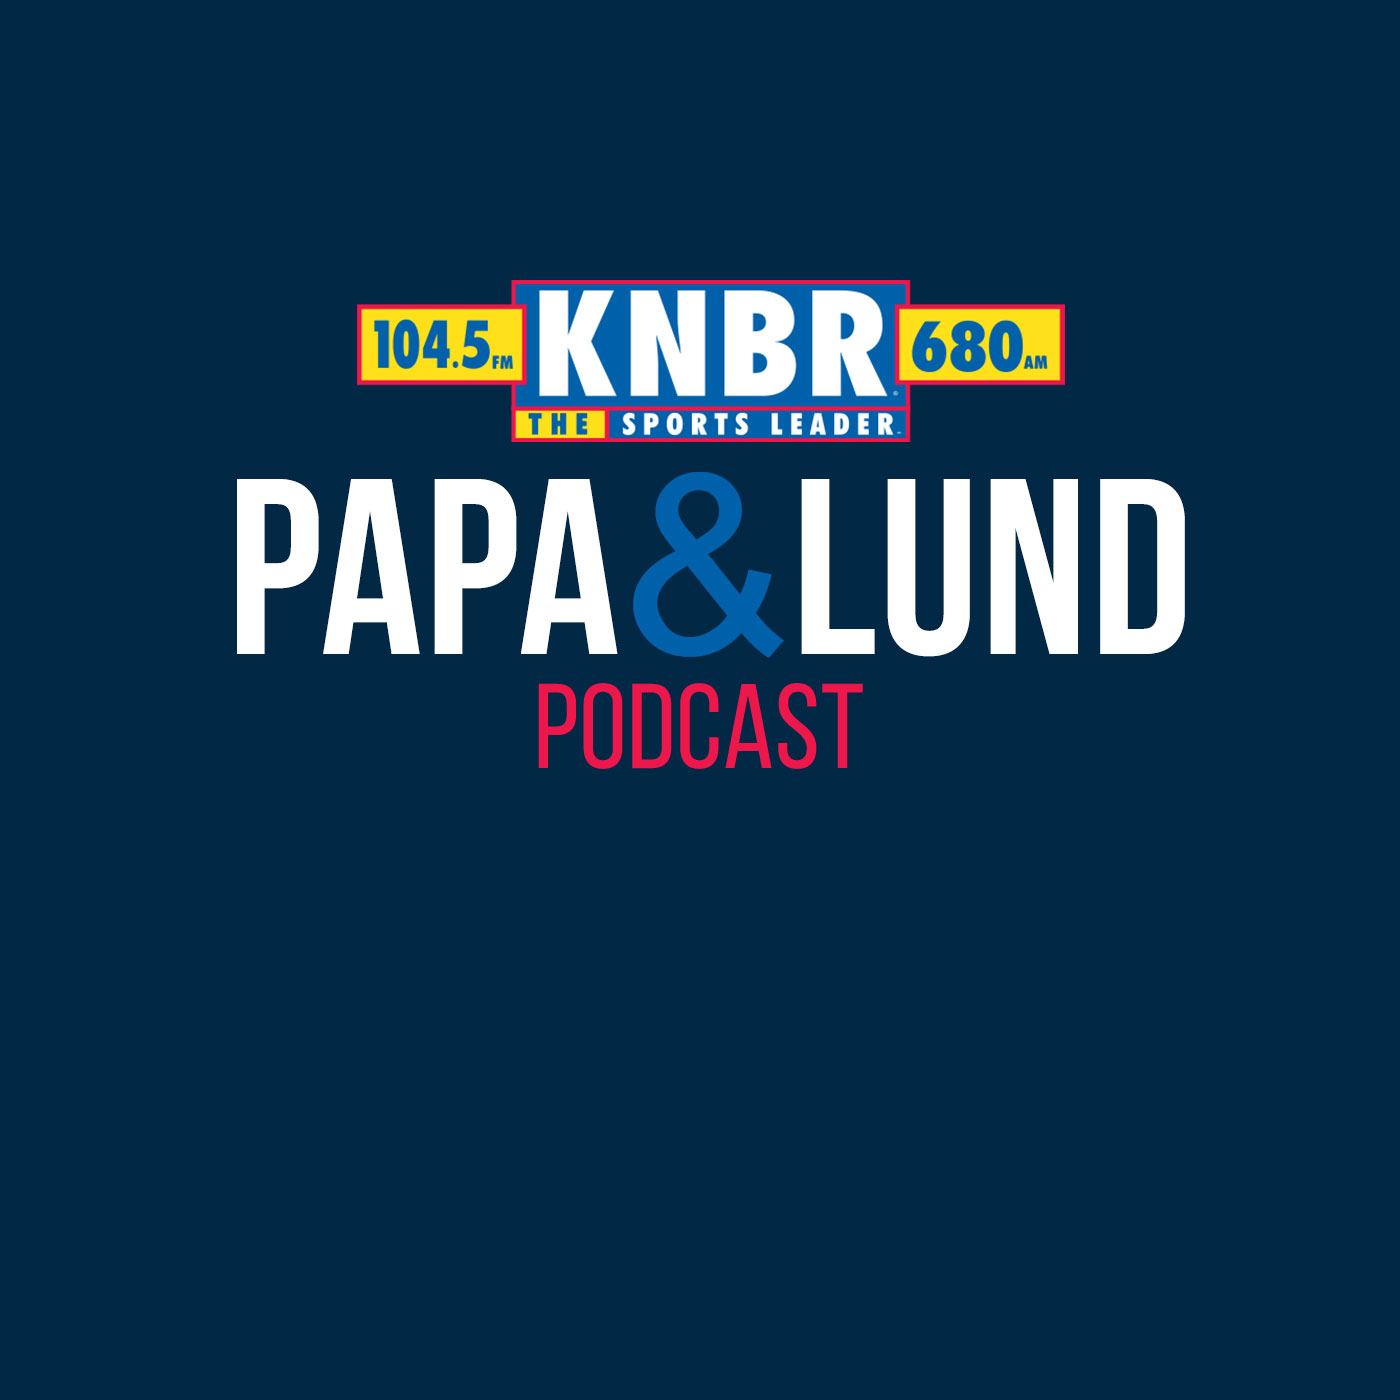 11-1 Kayte Christensen joins Papa & Lund to preview another battle of Nor Cal between the Warriors and Kings early in the NBA season